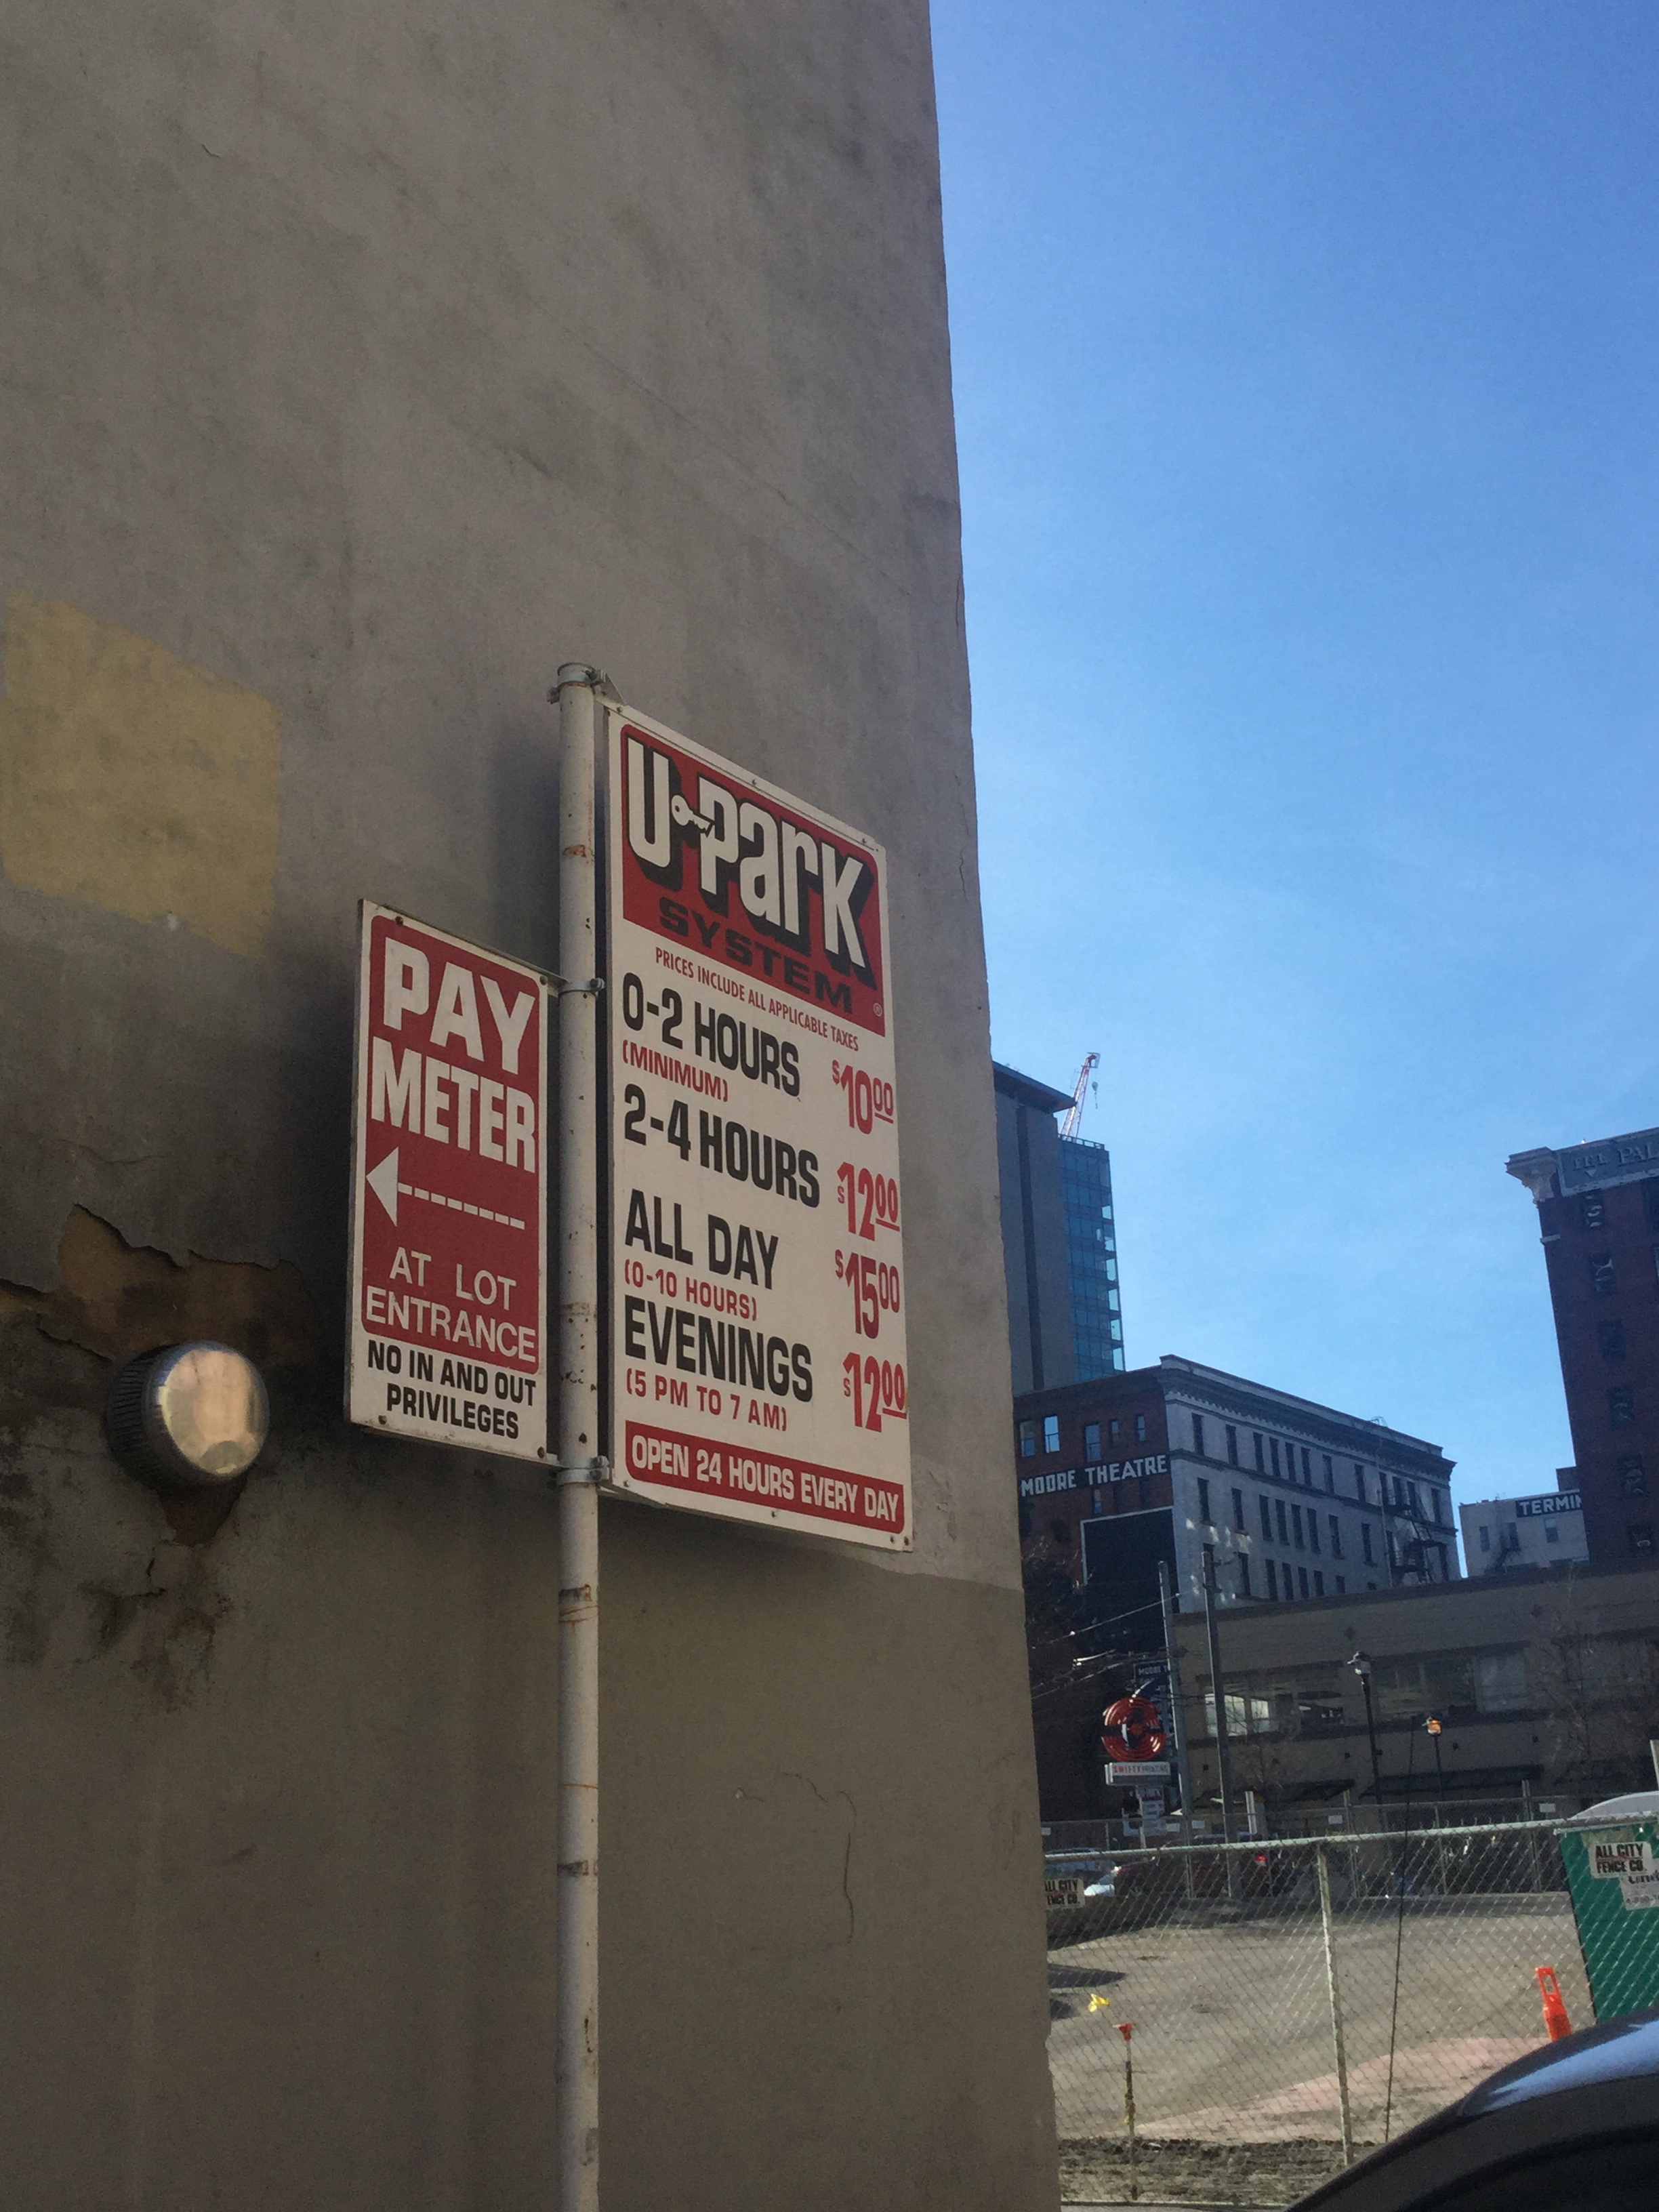 One thing I hate in Seattle is the expensive parking fee!